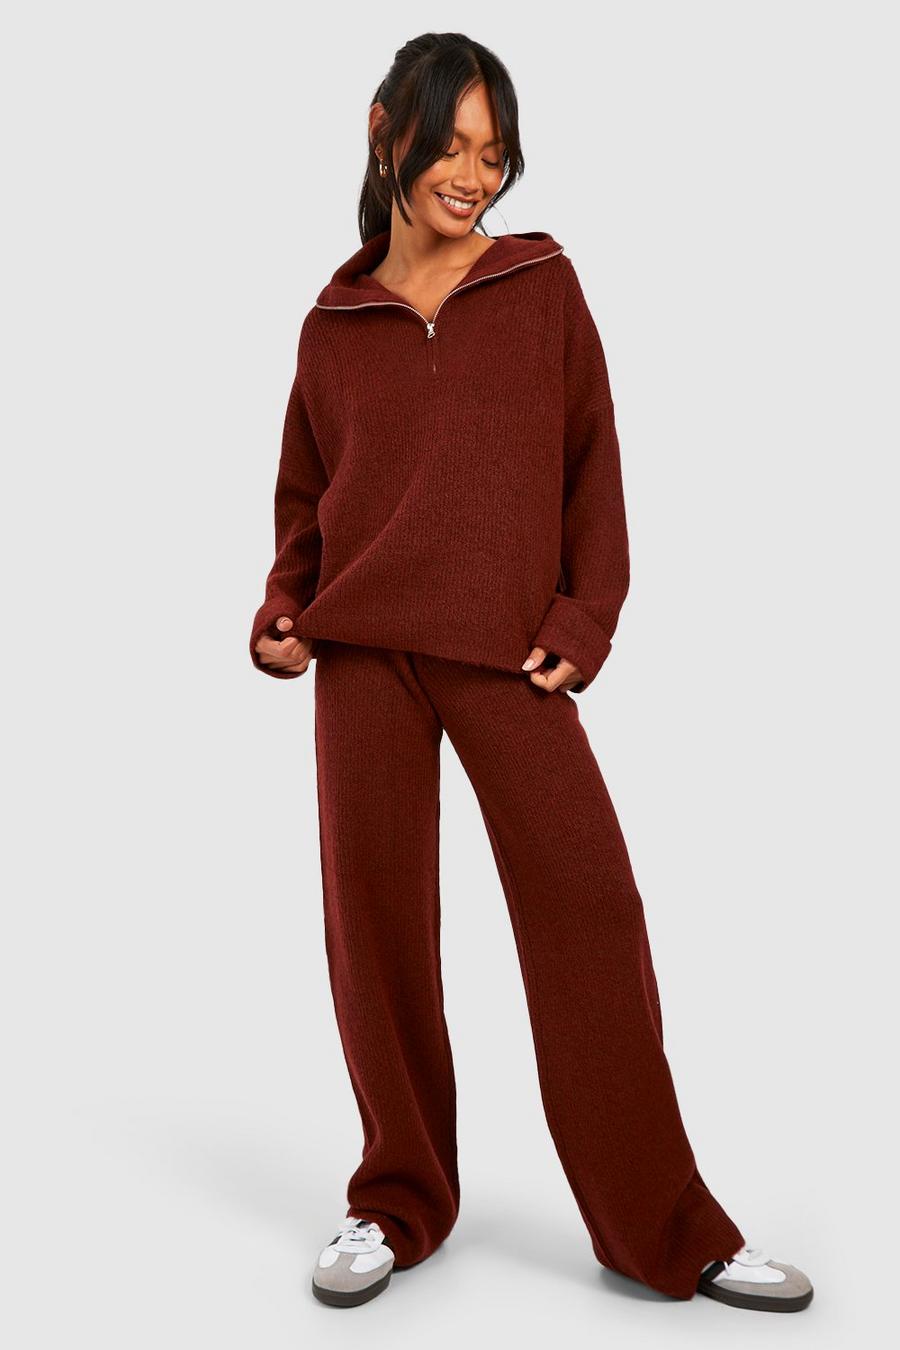 Brick Half Zip Funnel Neck And Wide Leg Pants Knitted Set